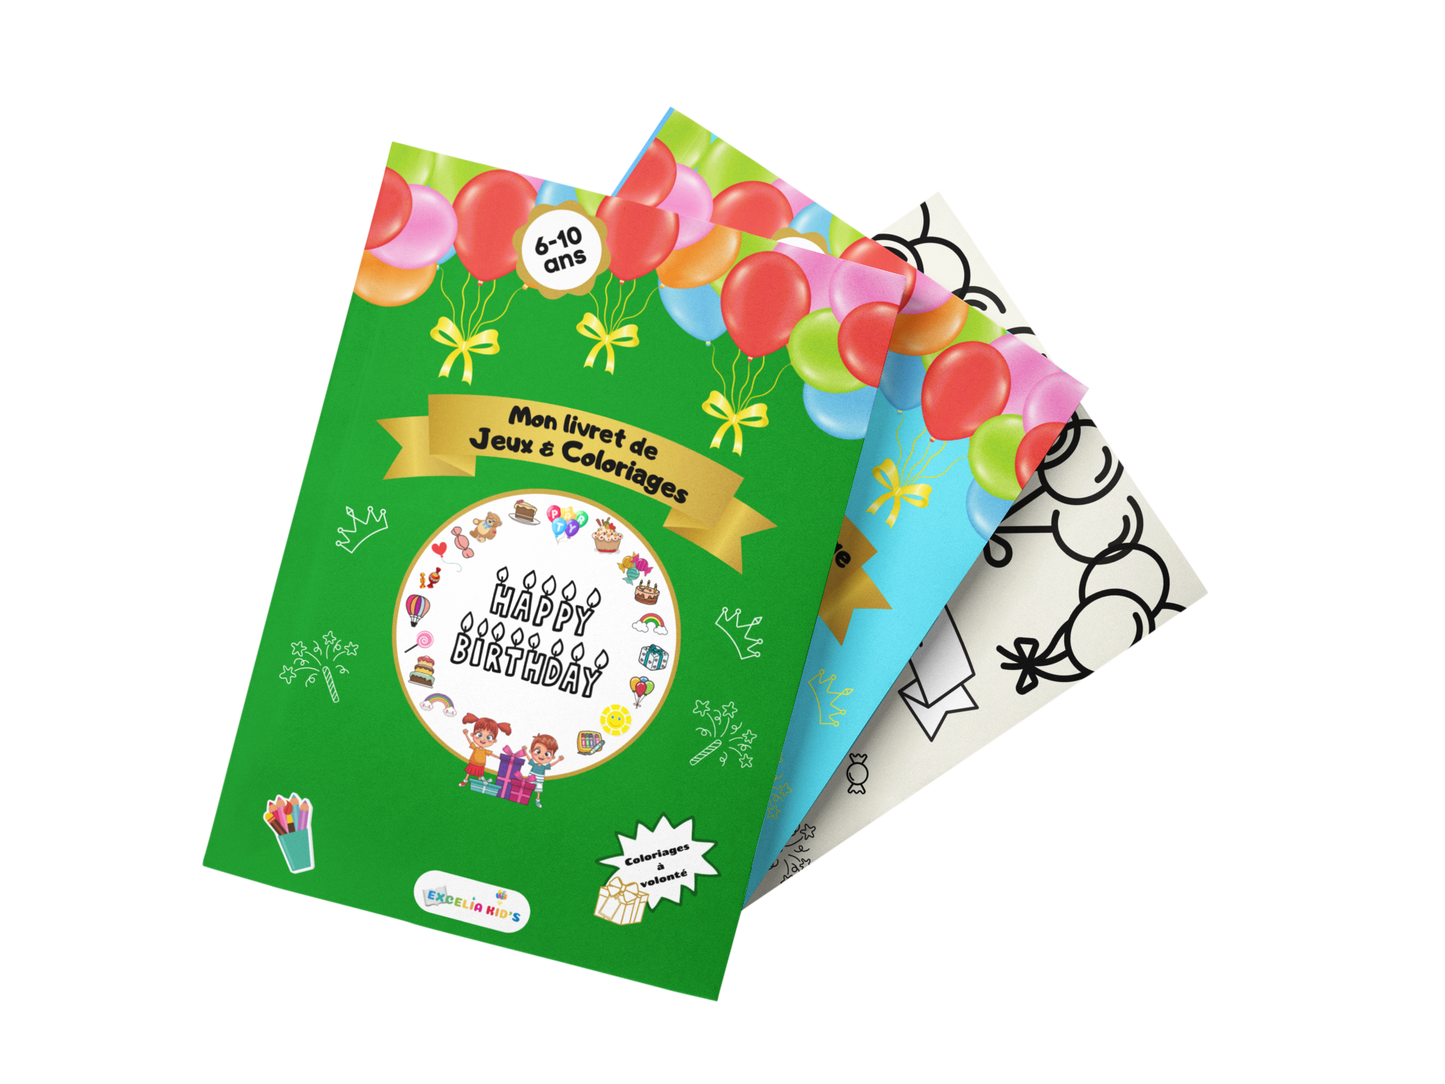 Birthday activity and coloring book for guest kids - Nice gift for guests from 6 to 10 years old: "English version"